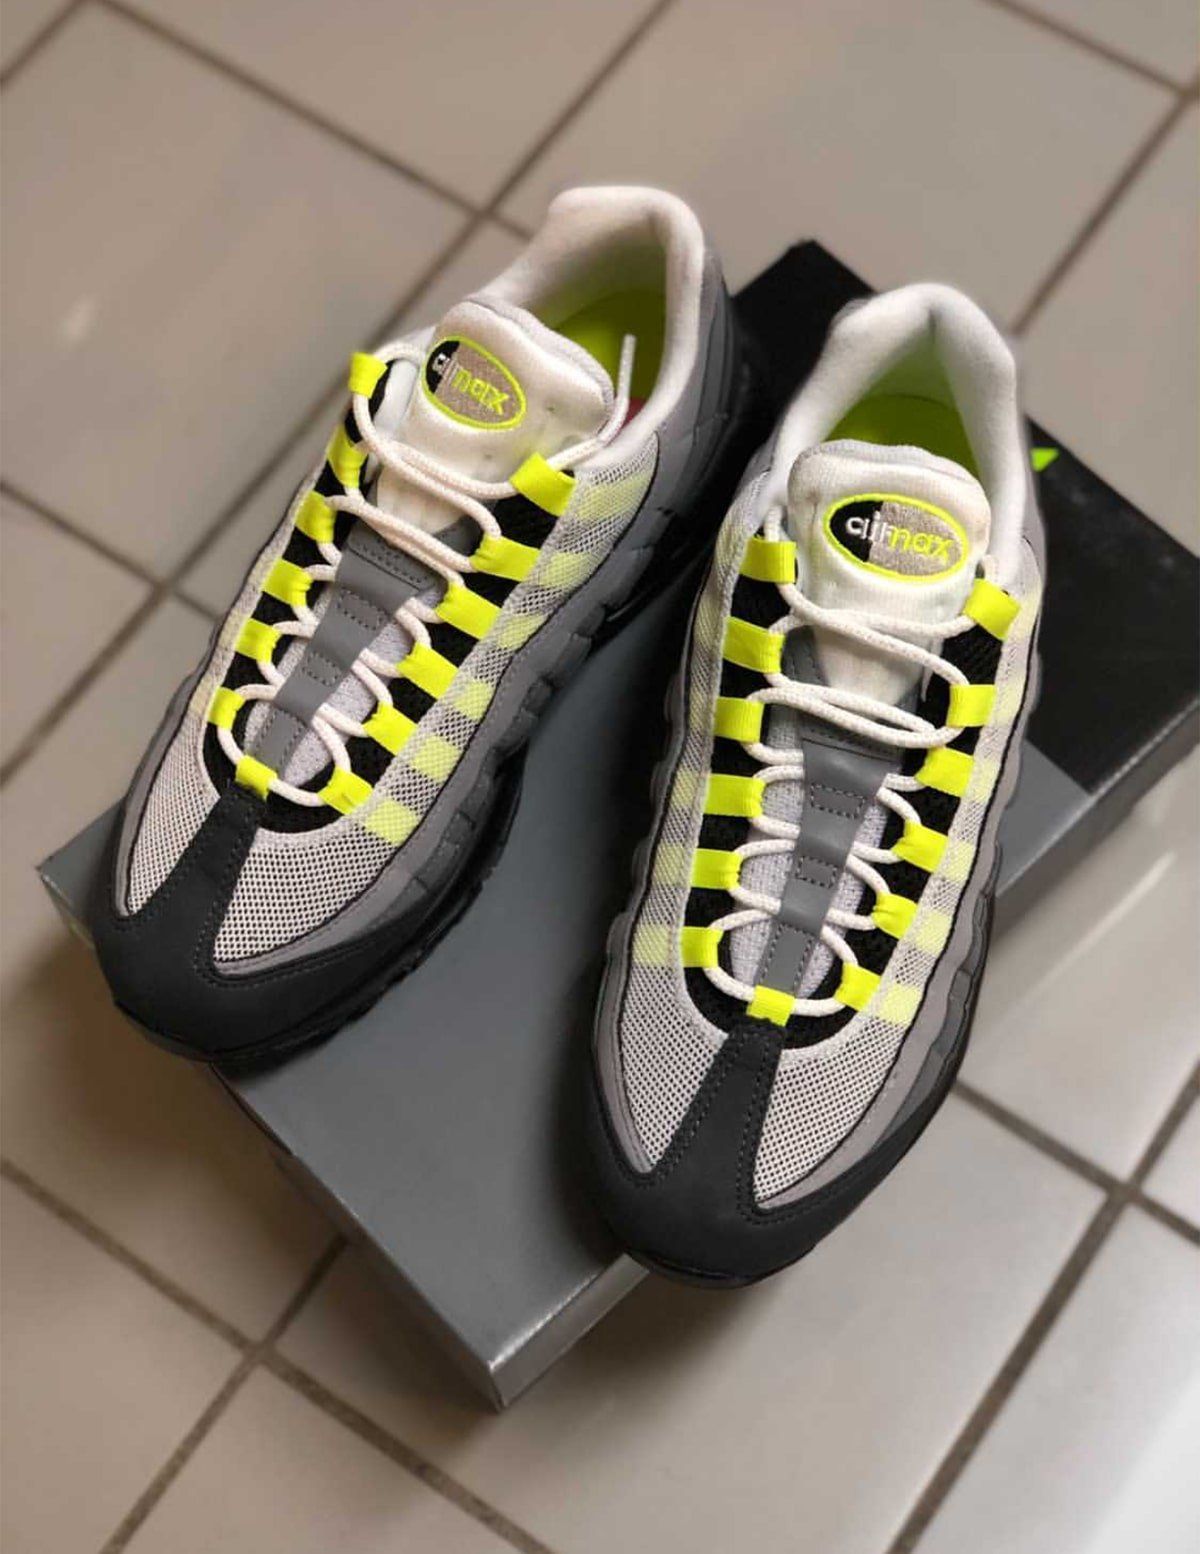 nike air max 95 neon 2020 release date